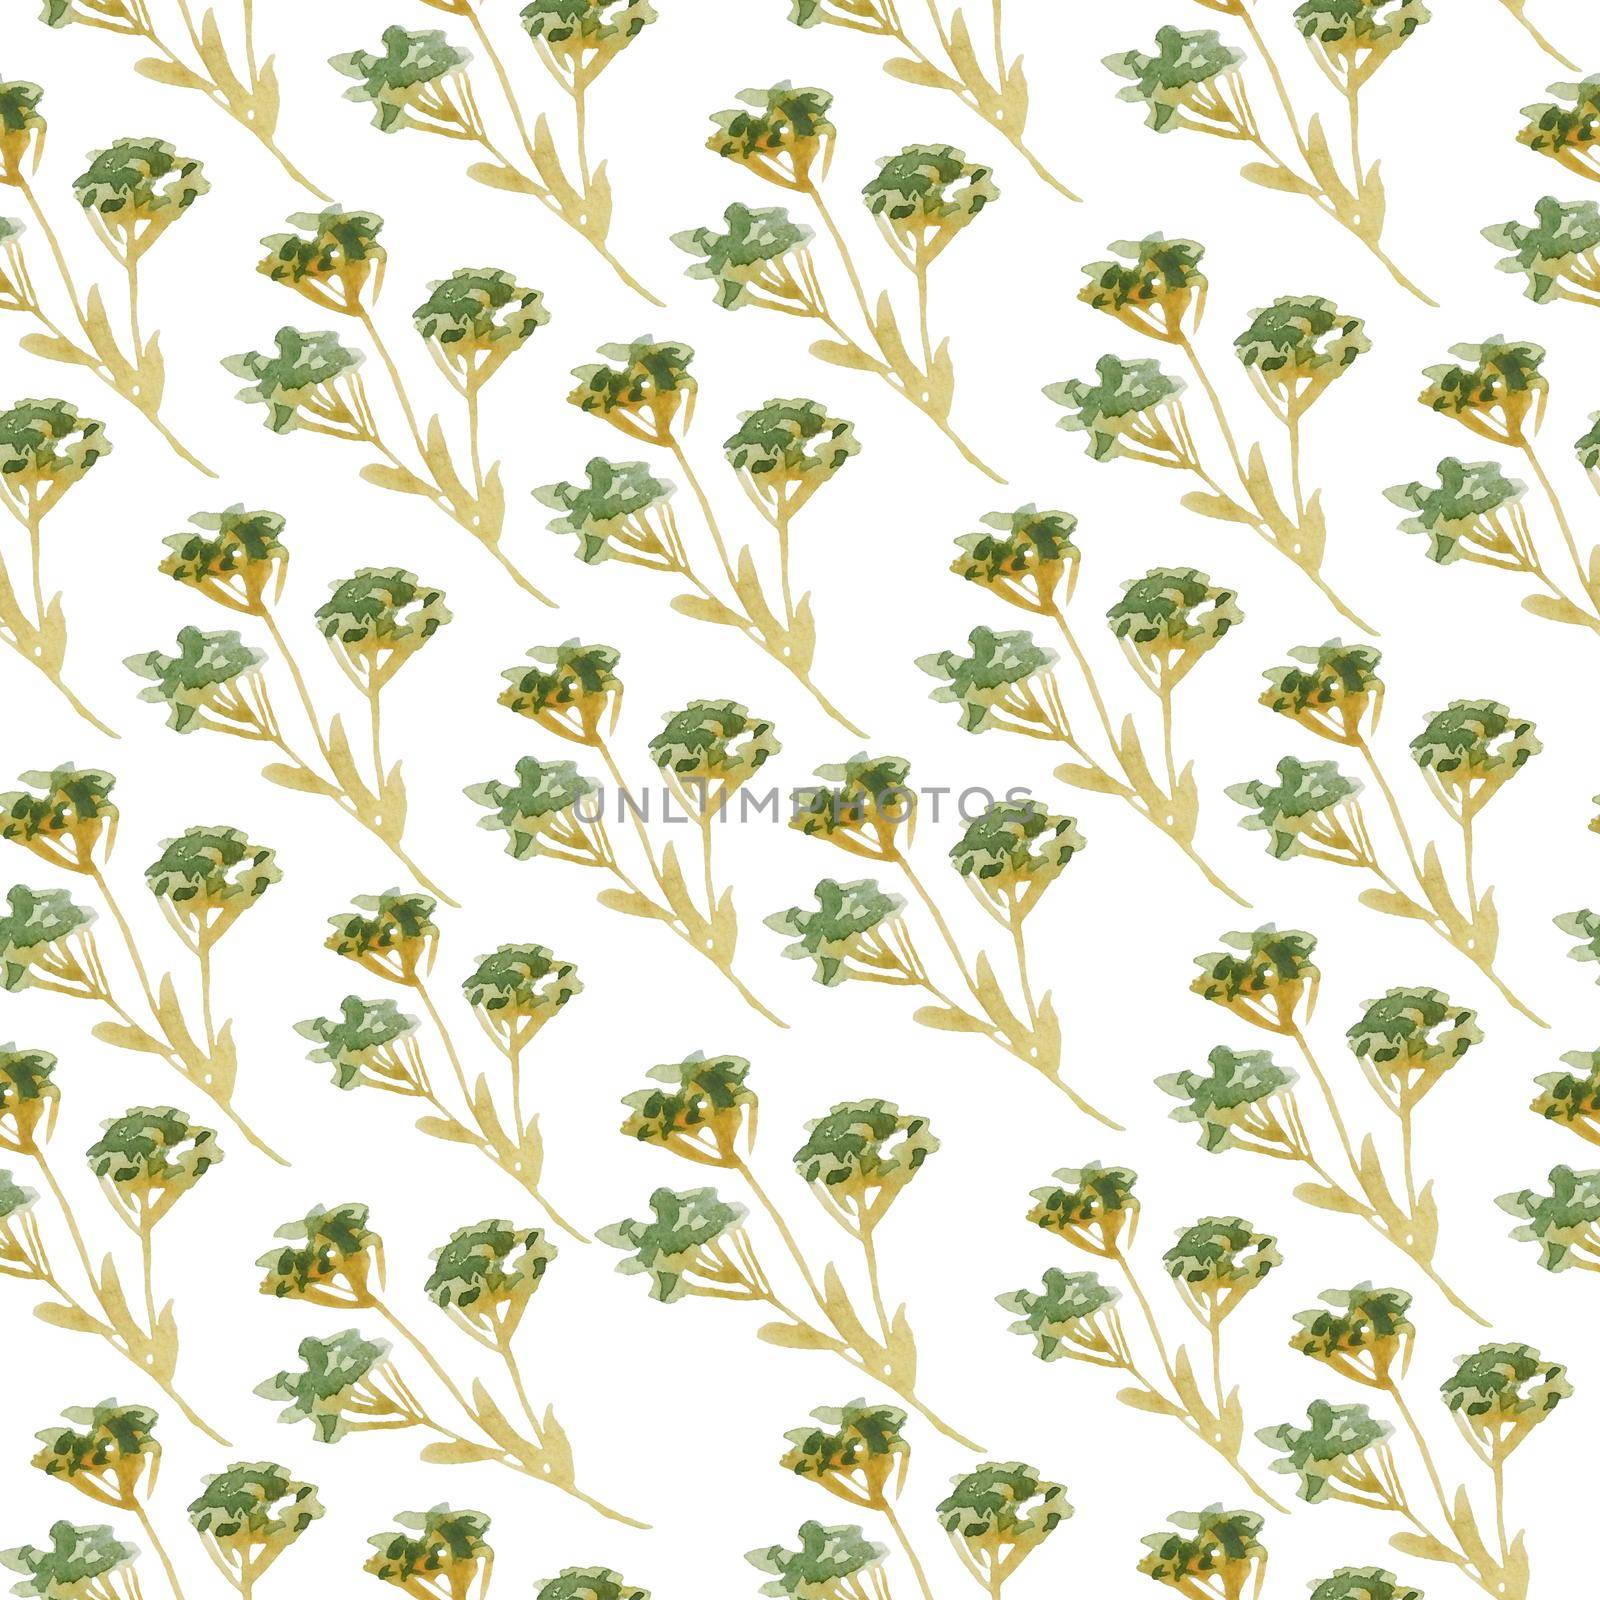 Seamless hand drawn watercolor pattern with green yellow wild herbs leaves grass in wood woodland forest. Organic natural plants, floral botanical design for wallpapers textile wrapping paper. Fall autumn